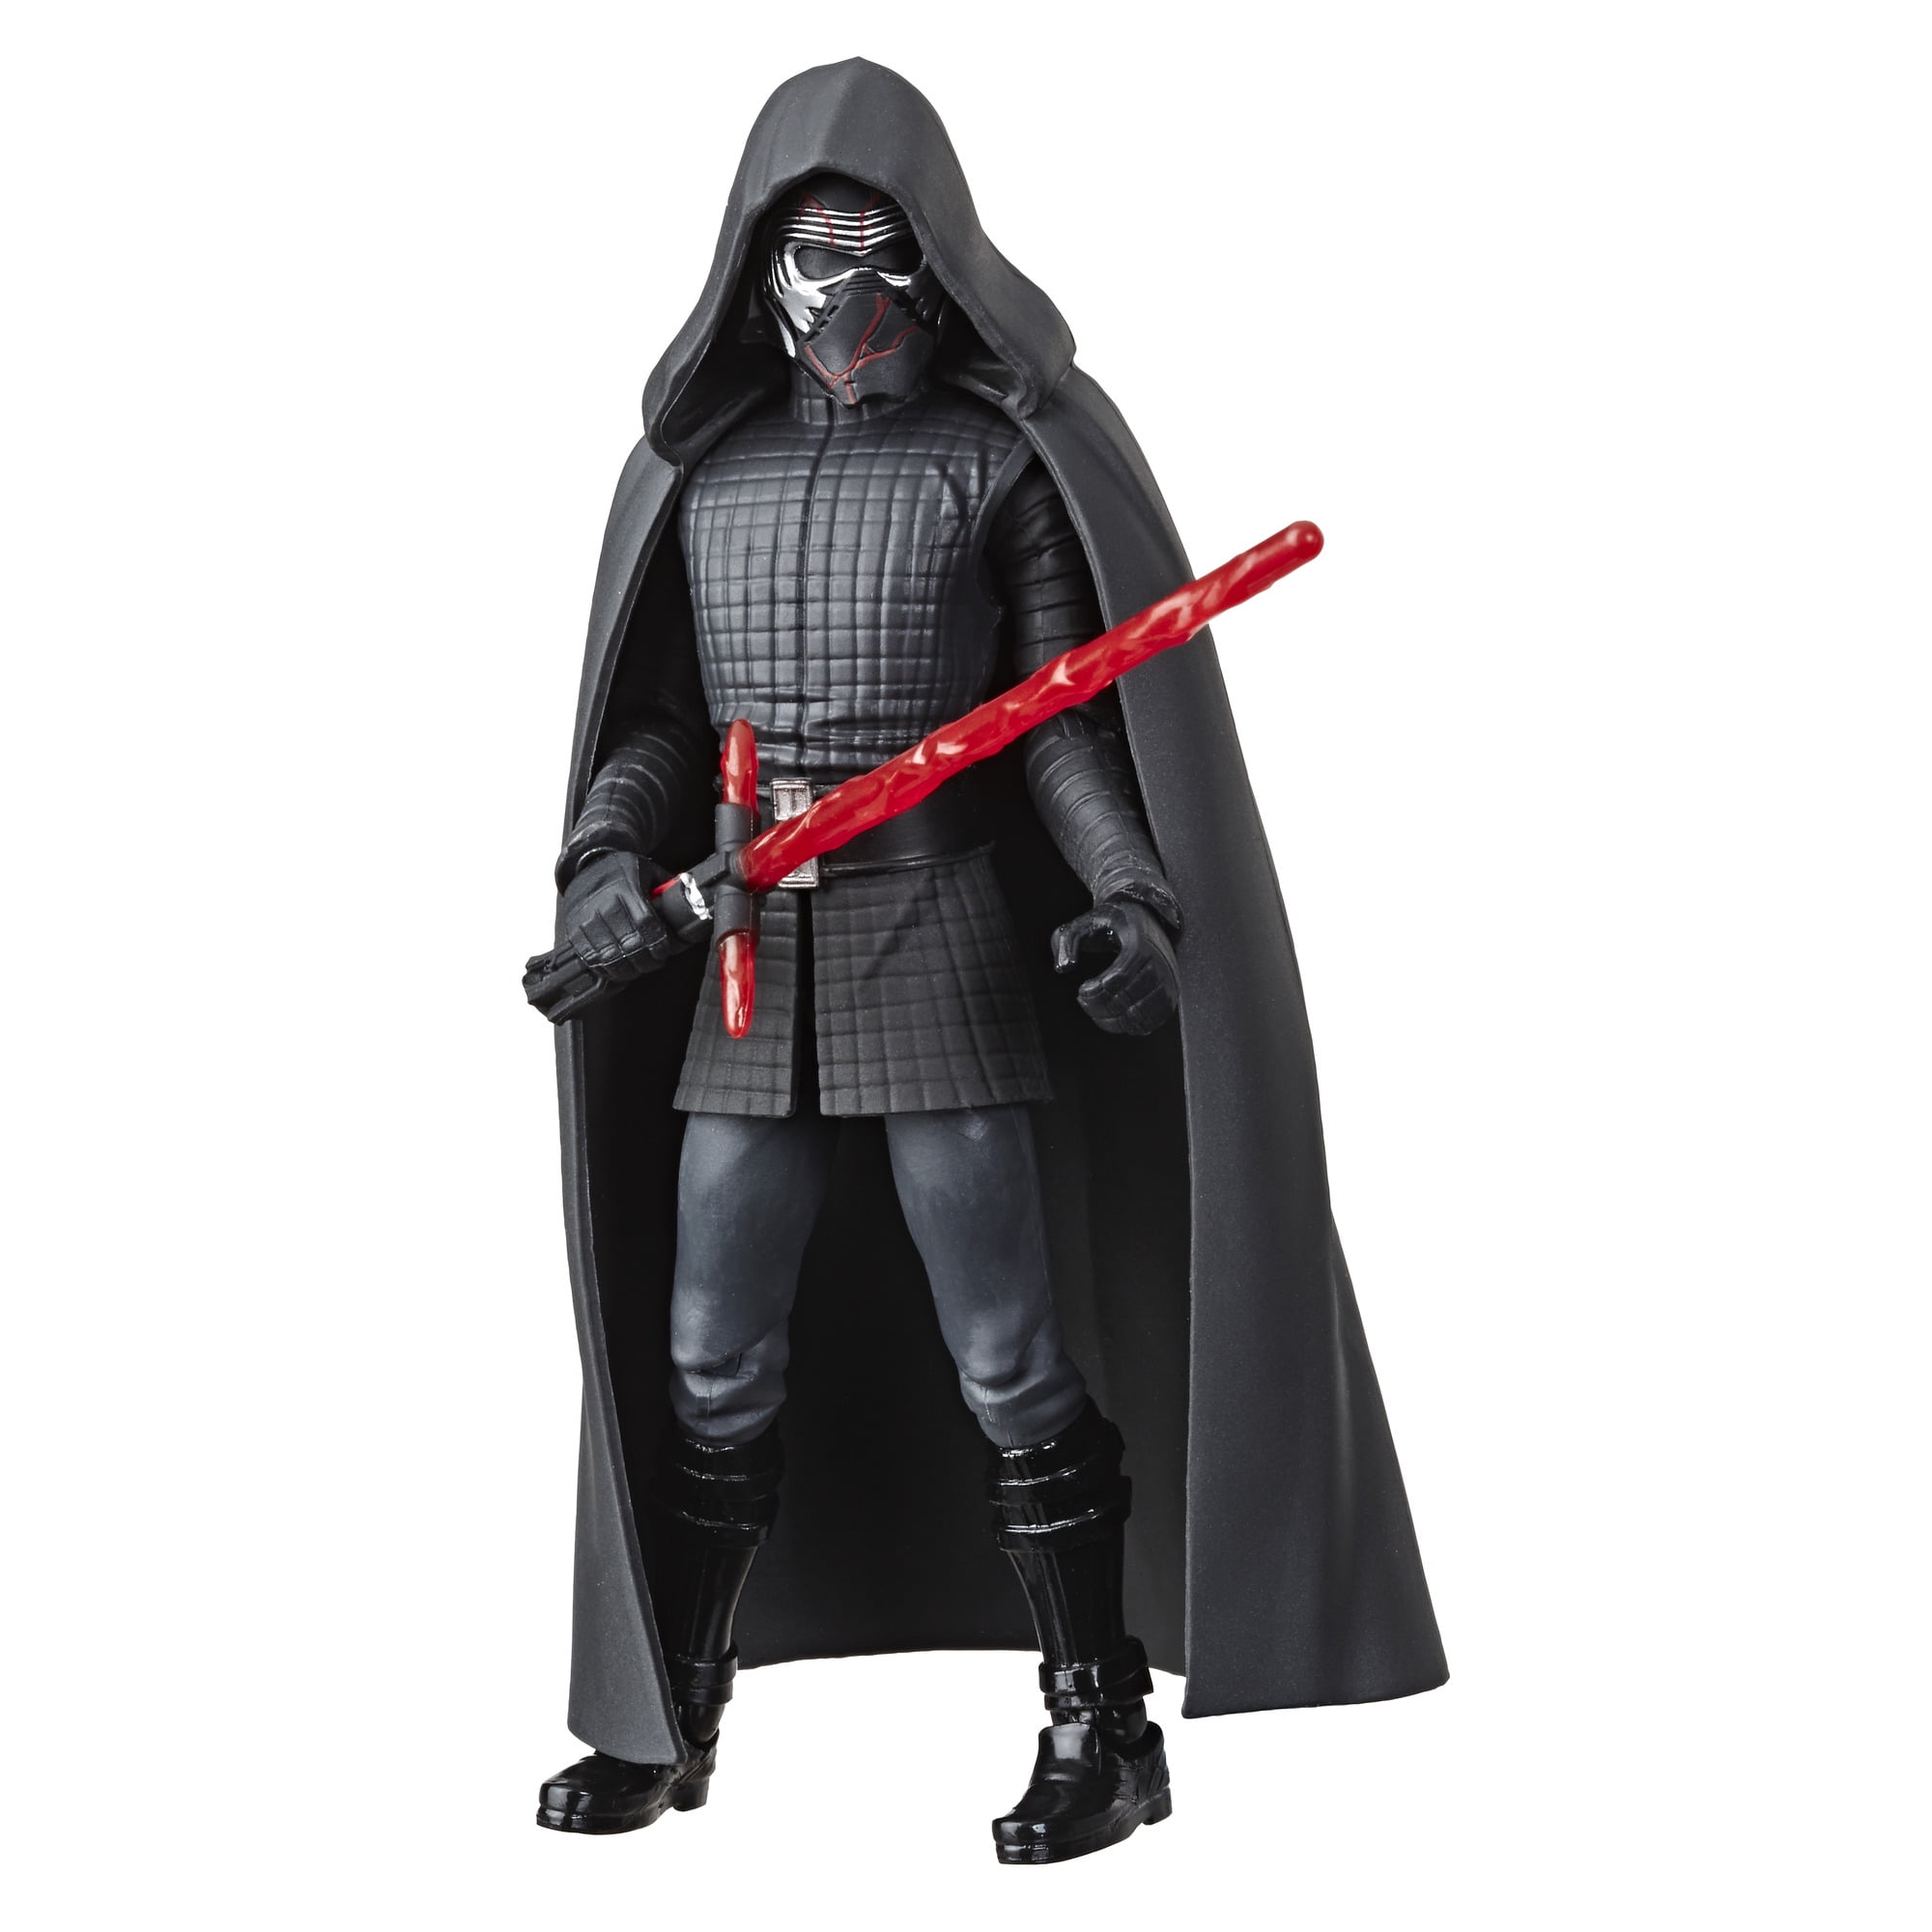 Details about   Disney Star Wars Toybox Darth Vader Action Figure 5 Inch New in Package 